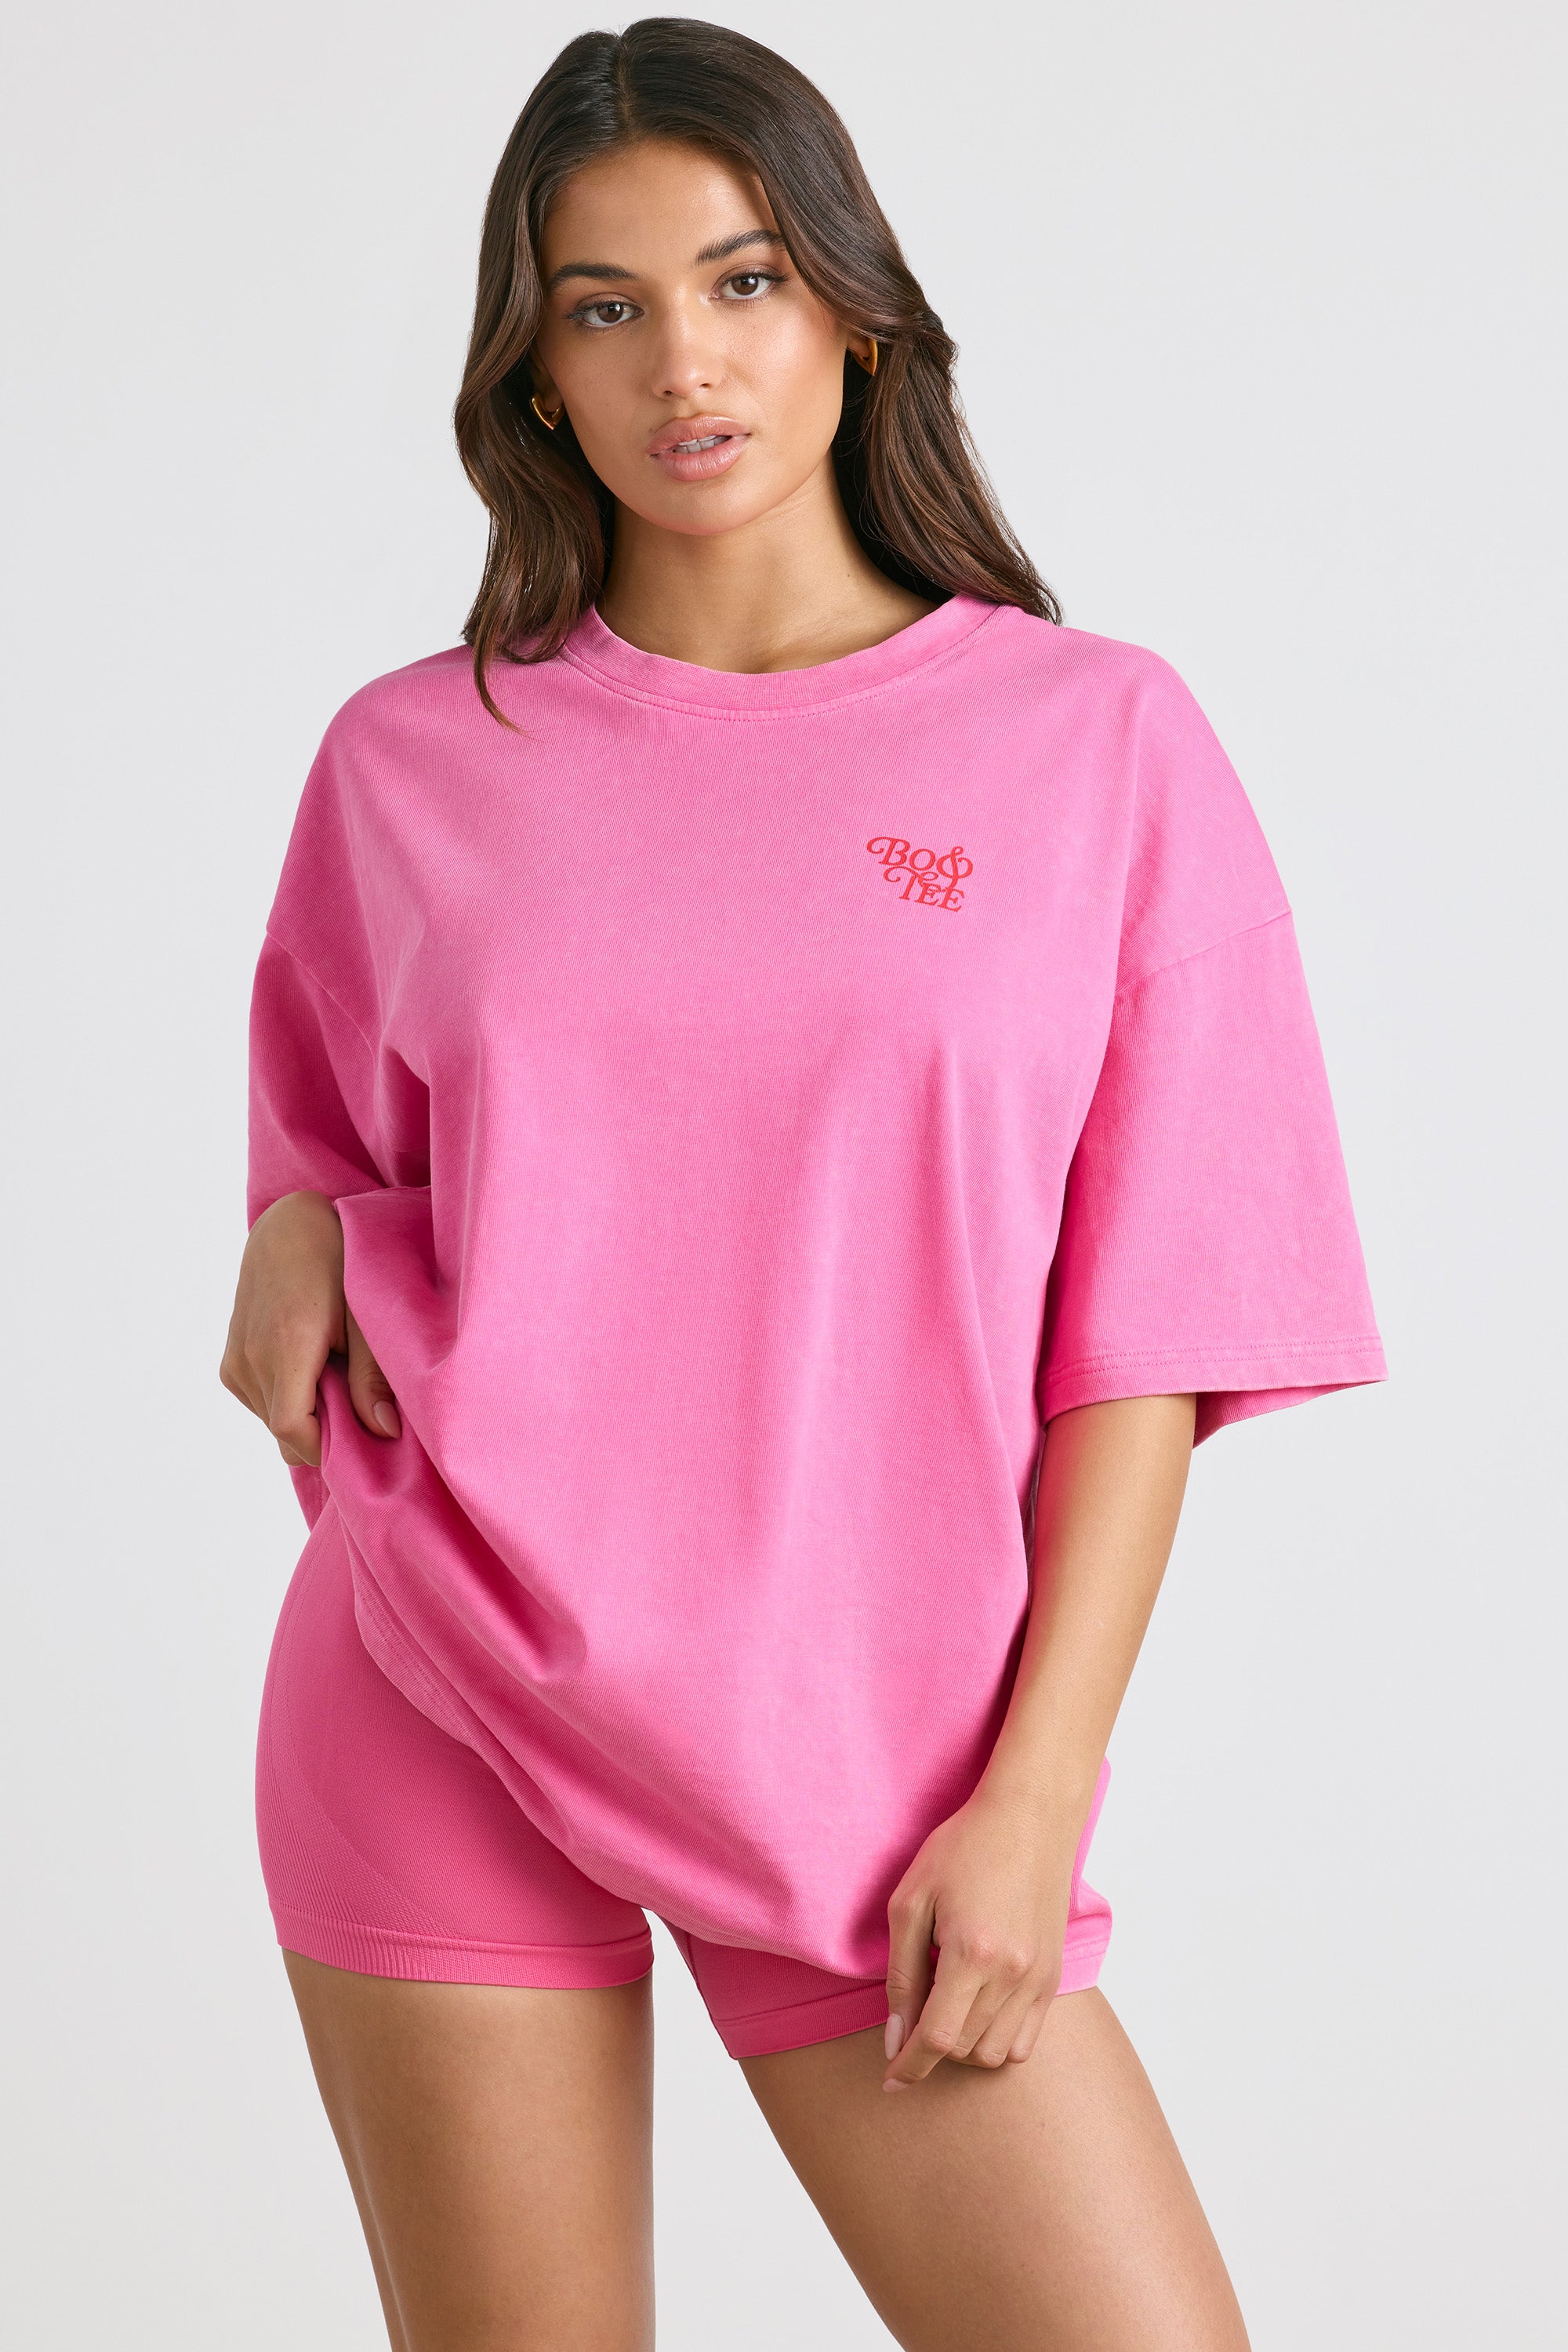 Sunday Love Oversized Hoodie in Hot Pink